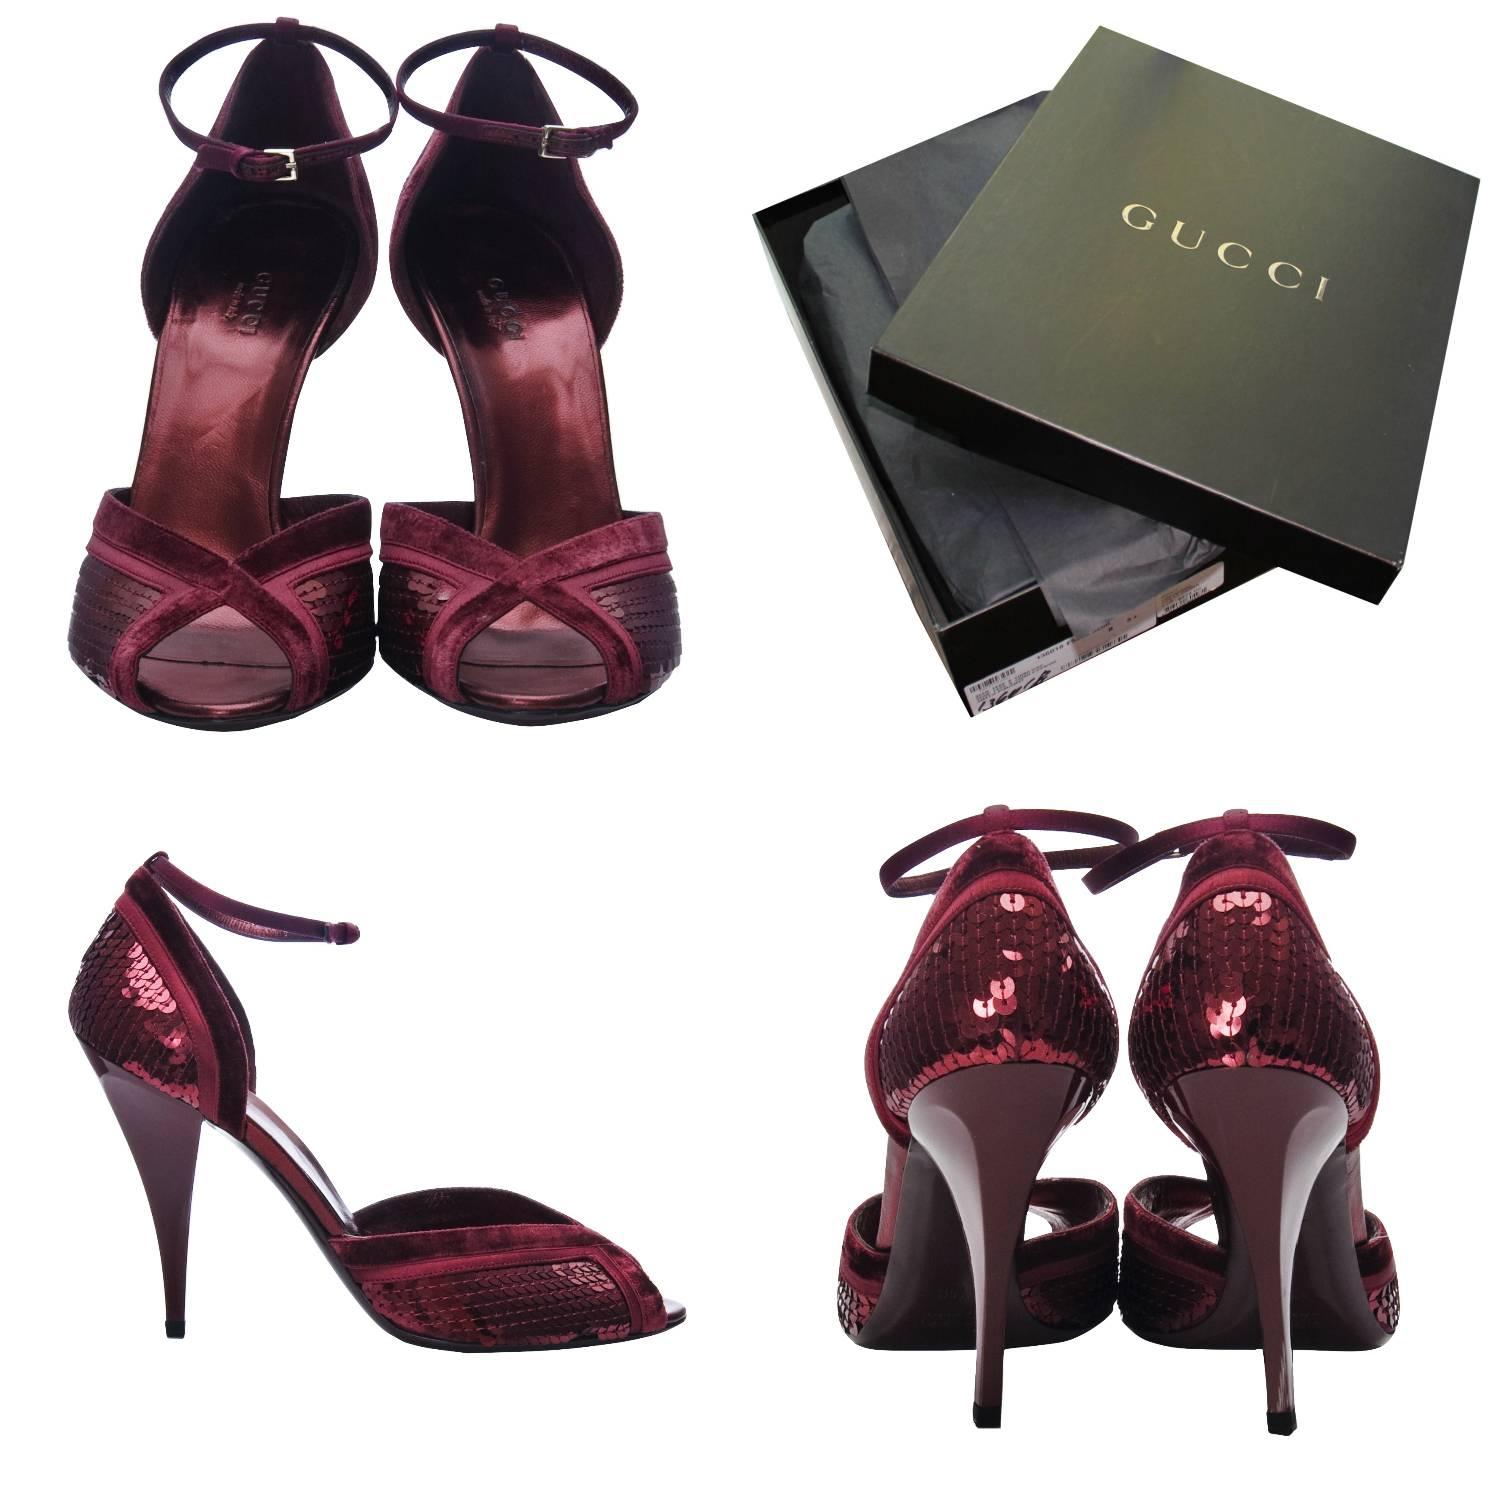 Tom Ford for Gucci Heels
Brand New
Tom Ford's Final Years w/ Gucci
Stunning in Red Wine
U.S. Size: 6
Satin Adjustable Ankle Strap
Gold Gucci Hardware
Red Velvet & Sequins
Red Leather Insole
4.25